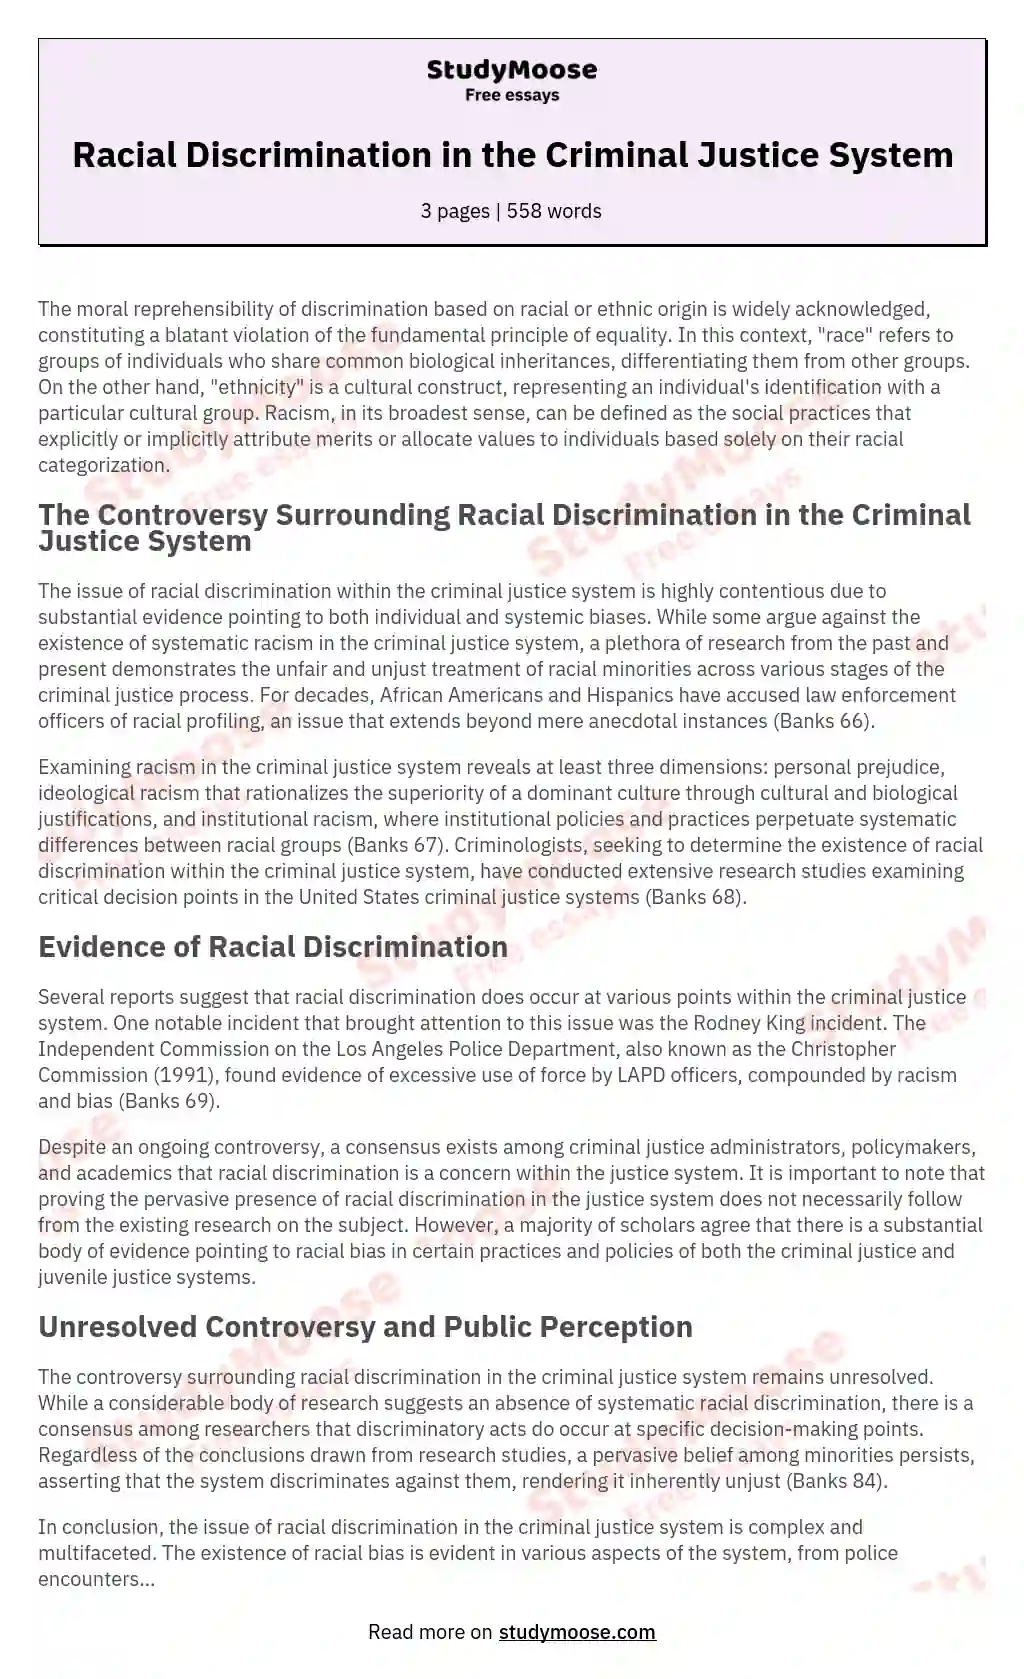 Racial Discrimination in the Criminal Justice System